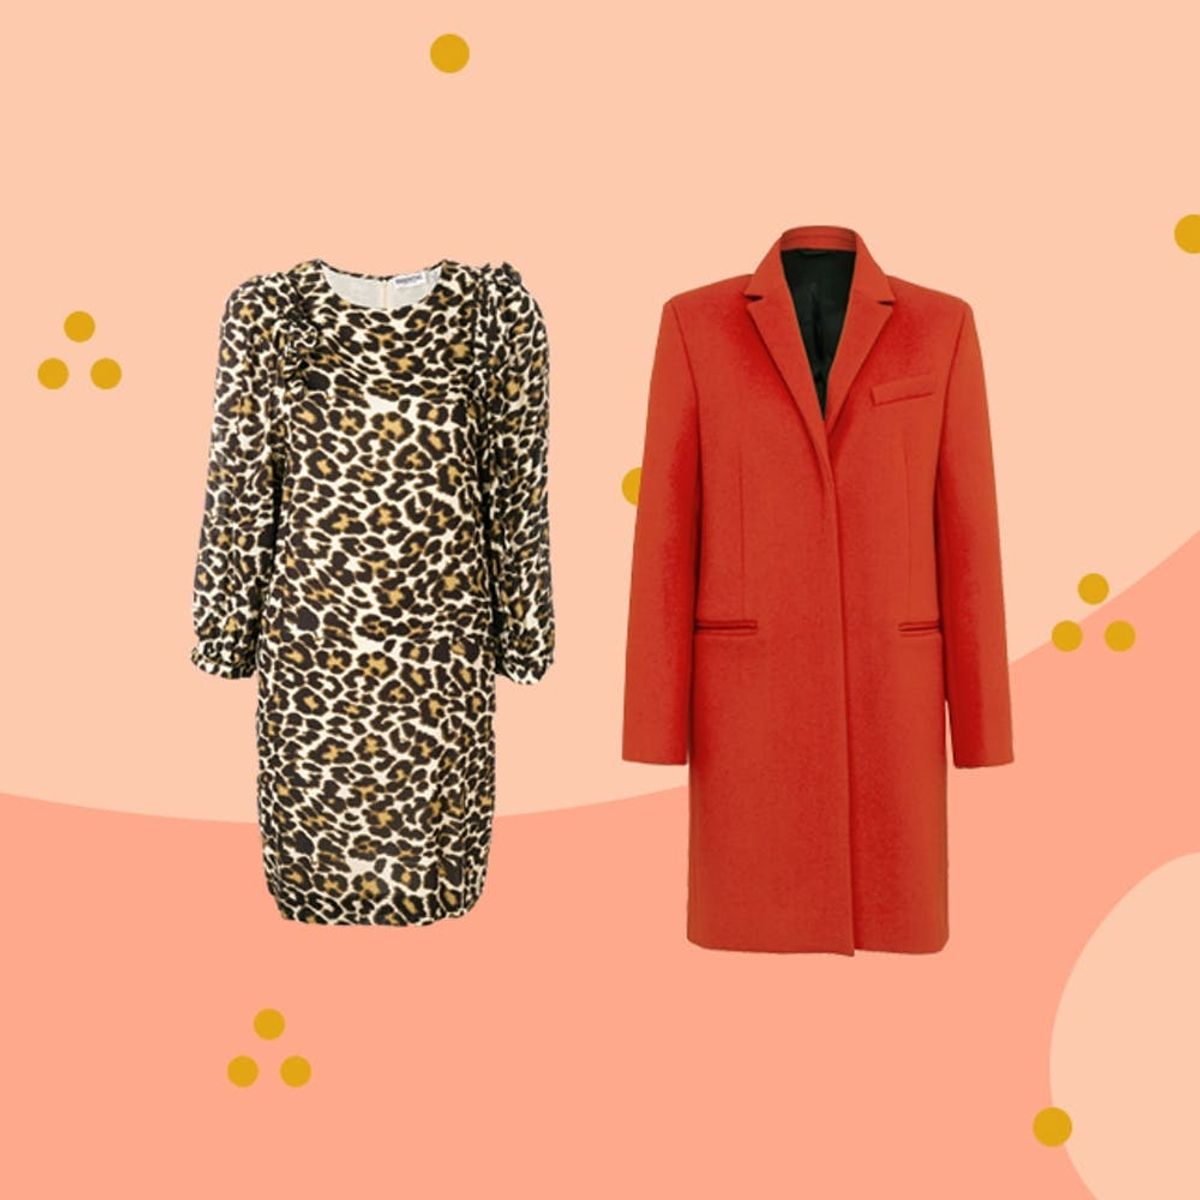 3 Celebrity-Inspired Ways to Incorporate Leopard into Your Next #OOTD